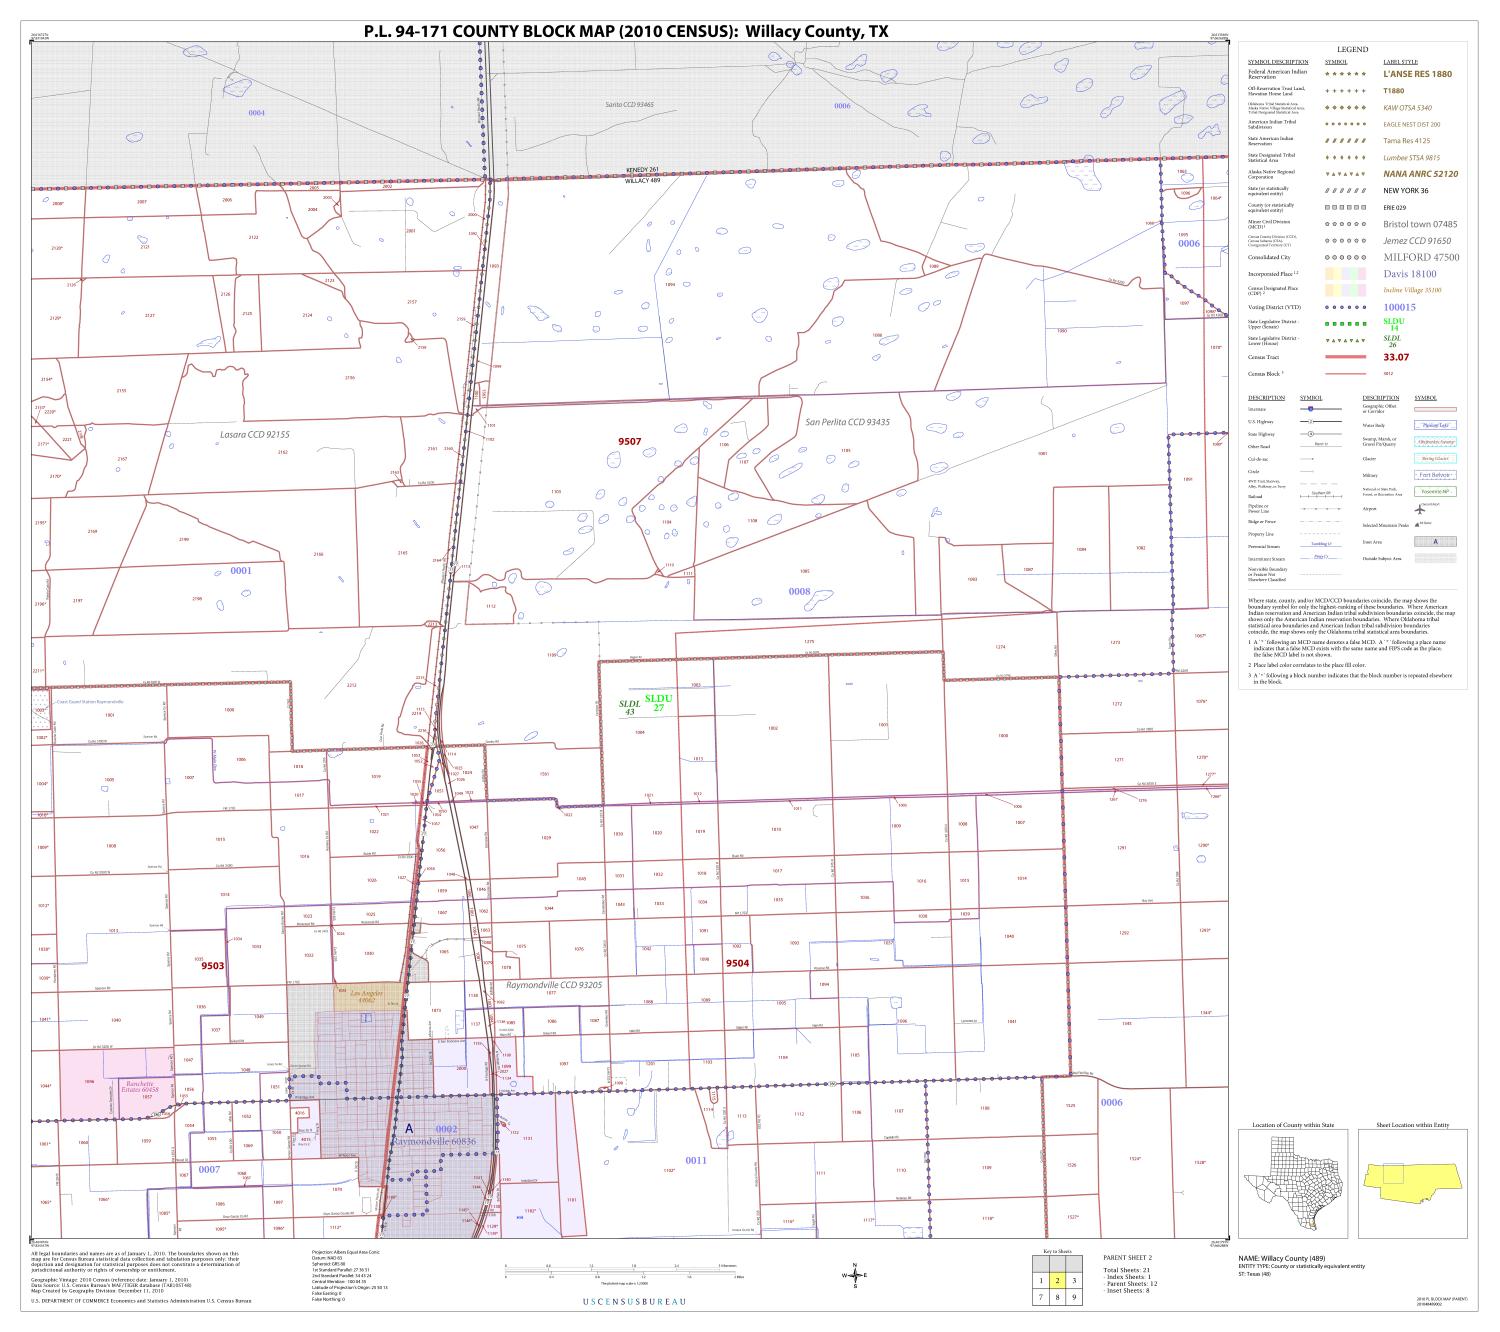 P.L. 94-171 County Block Map (2010 Census): Willacy County, Block 2
                                                
                                                    [Sequence #]: 1 of 1
                                                